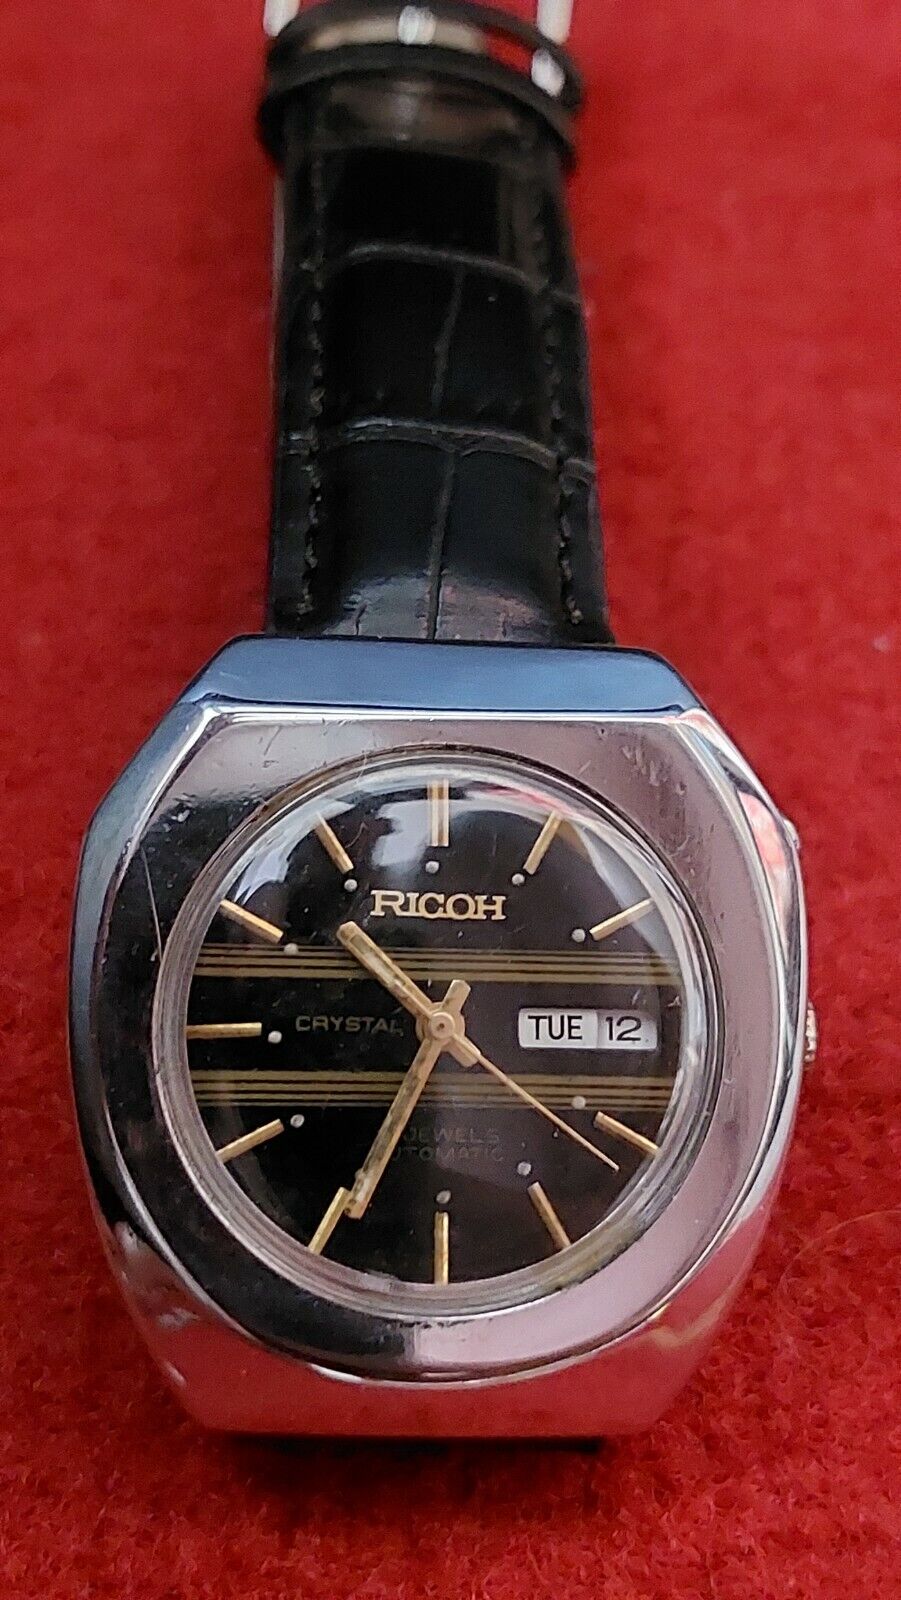 Ricoh Crystal 21 Jewels Automatic Date Date Black Vintage Dial Beautiful Watch 